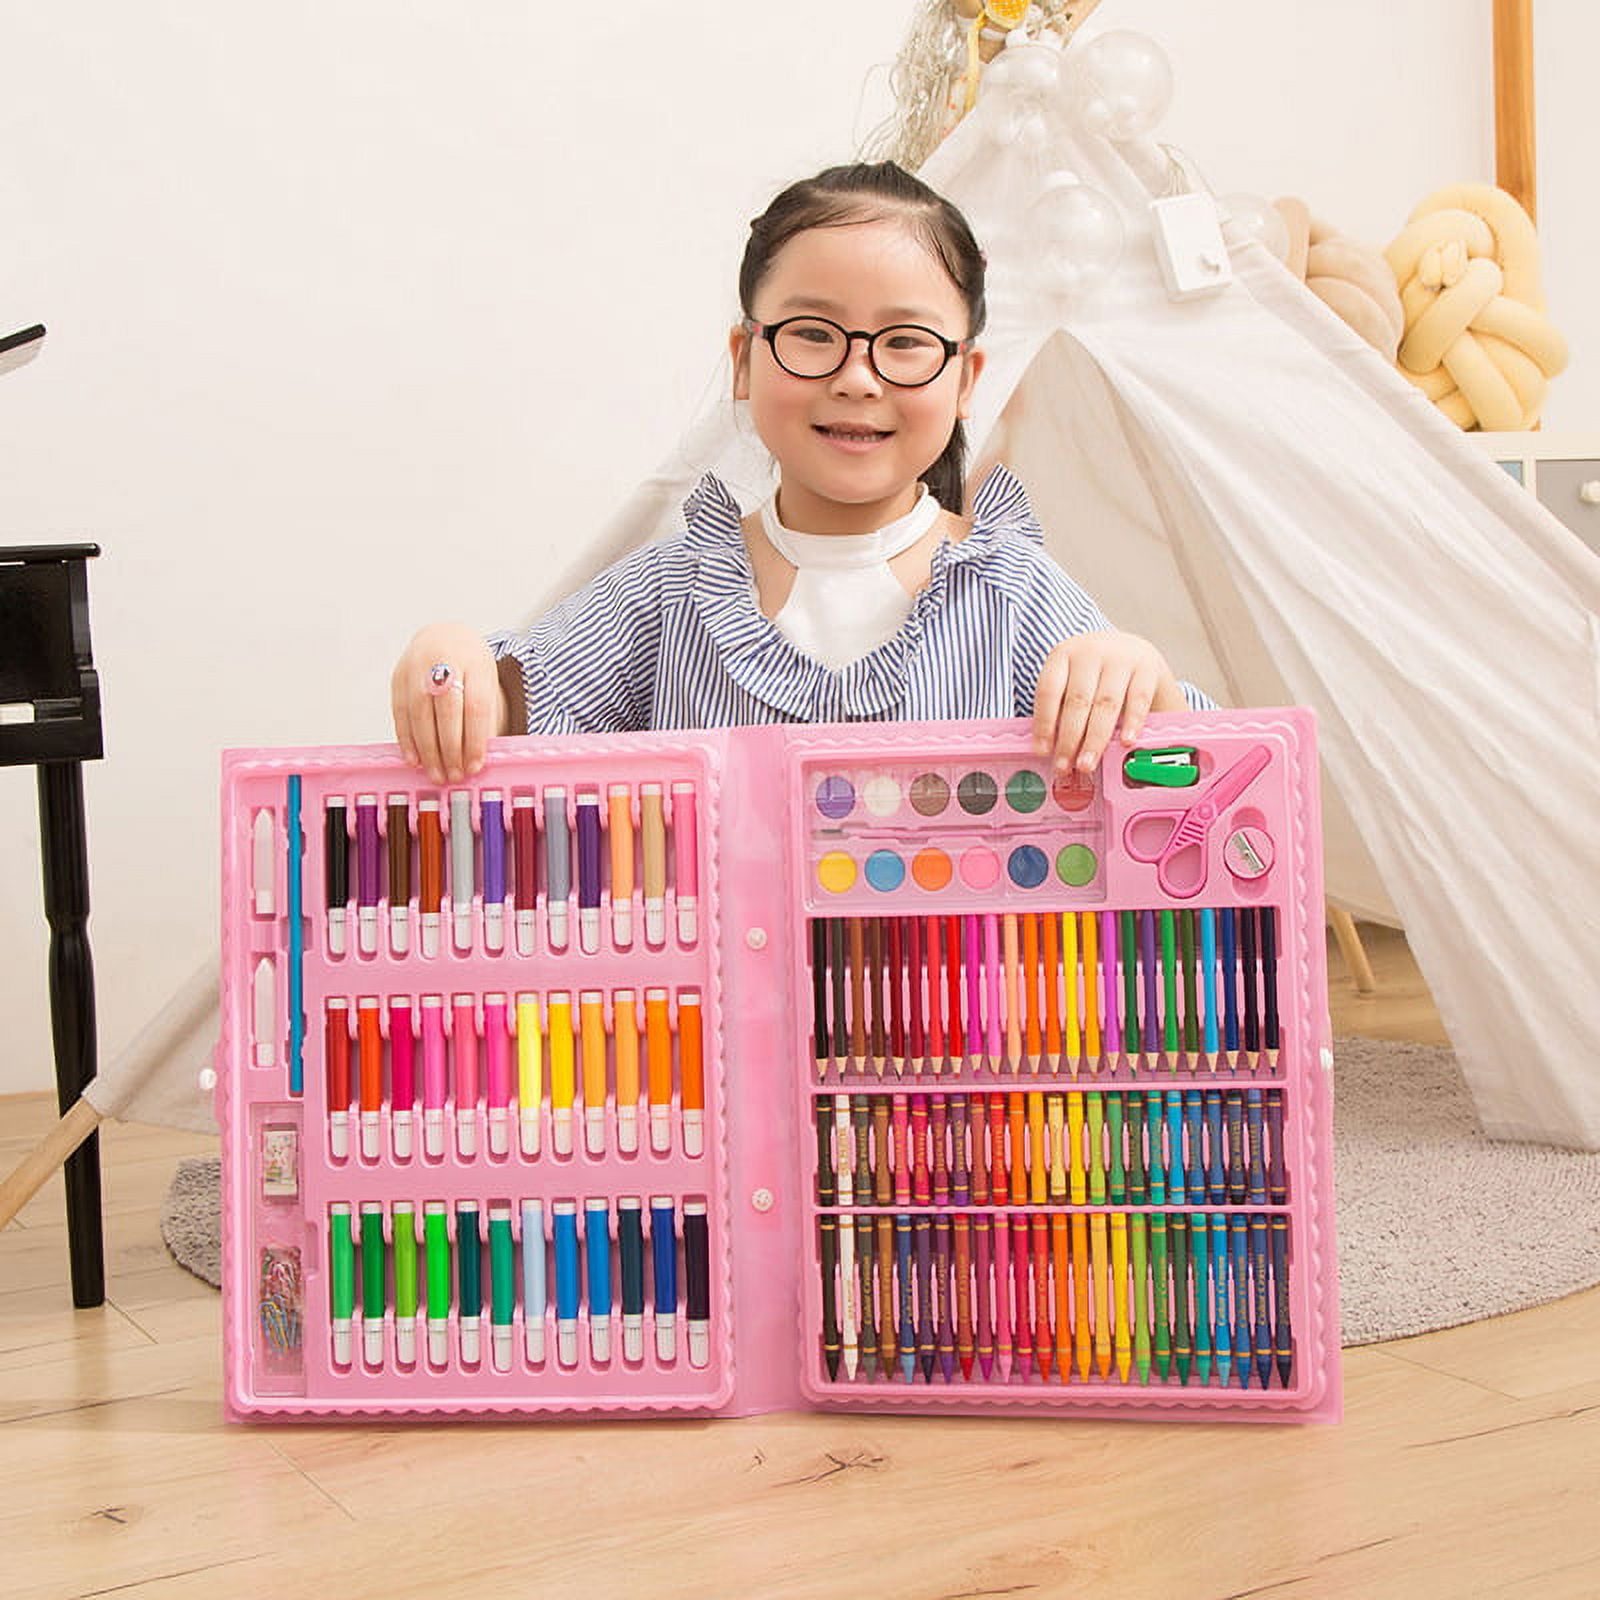 Deluxe 6 in 1 Art Creativity Set Kids Drawing Tools Watercolor Pencil Set Color Pen Brush Set Student Art Easel Tools Painting Set (176 Pieces)5ml